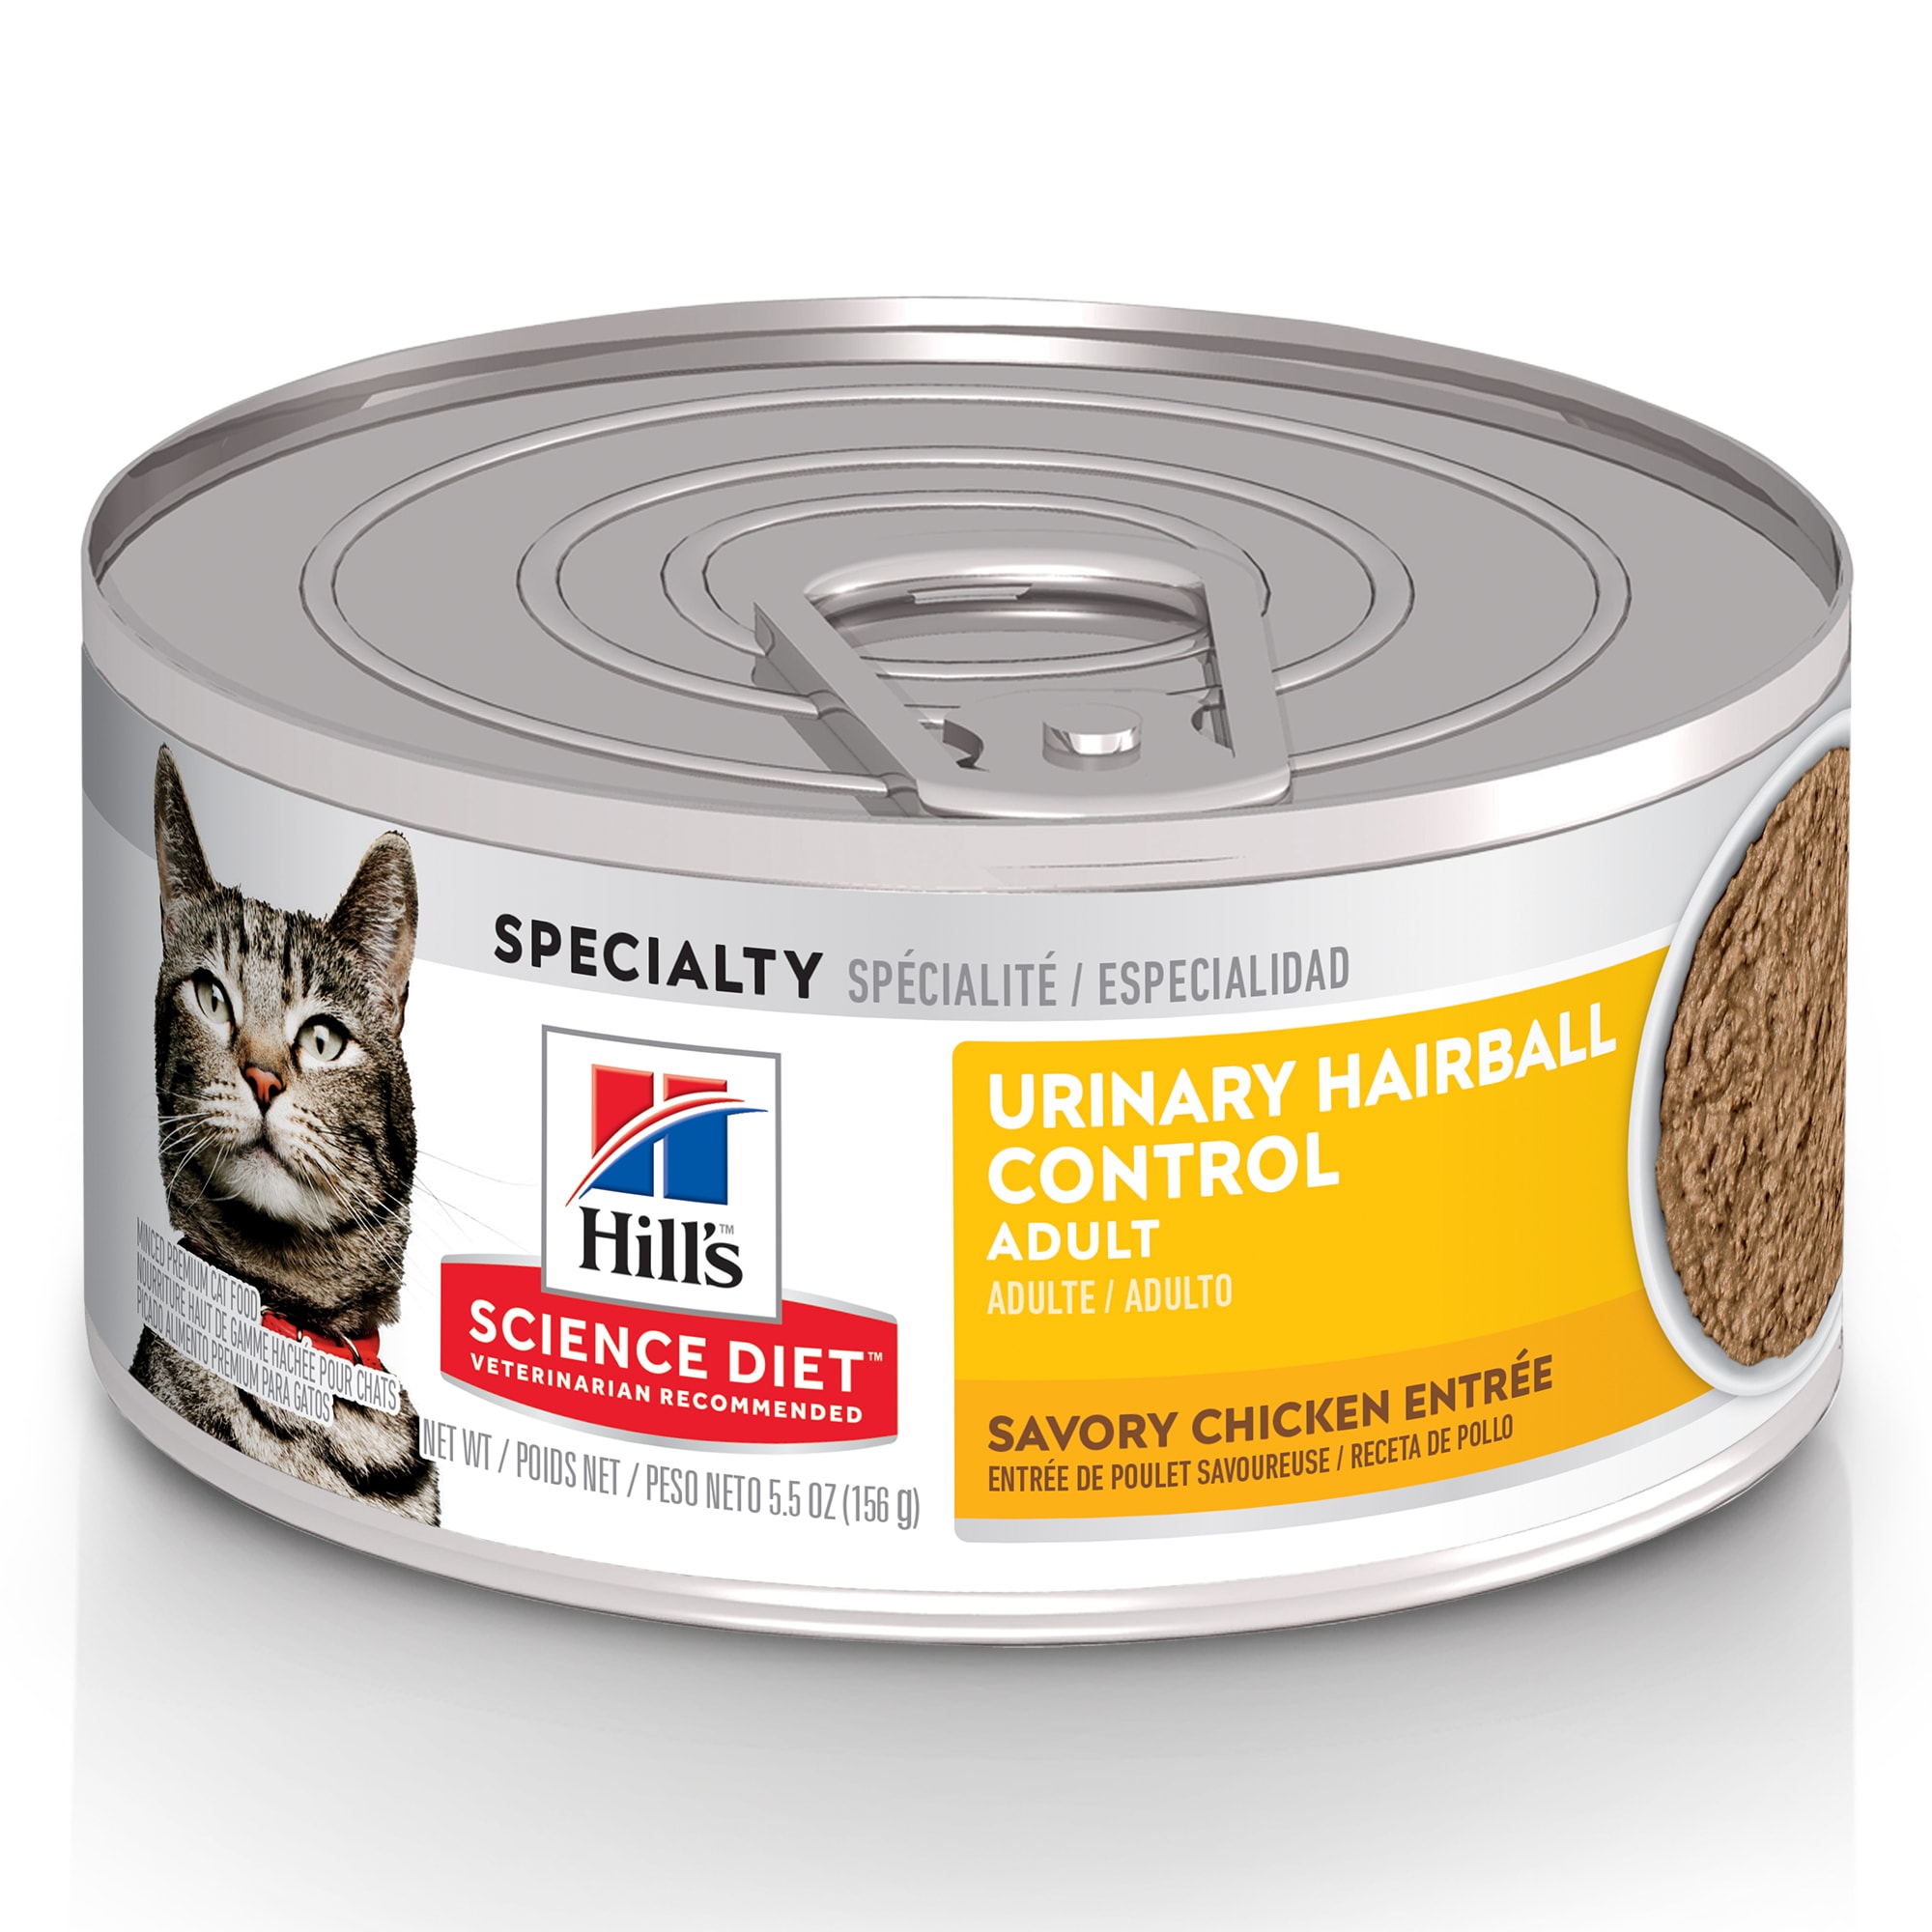 Hill's Science Diet Adult Urinary & Hairball Control, Savory Chicken